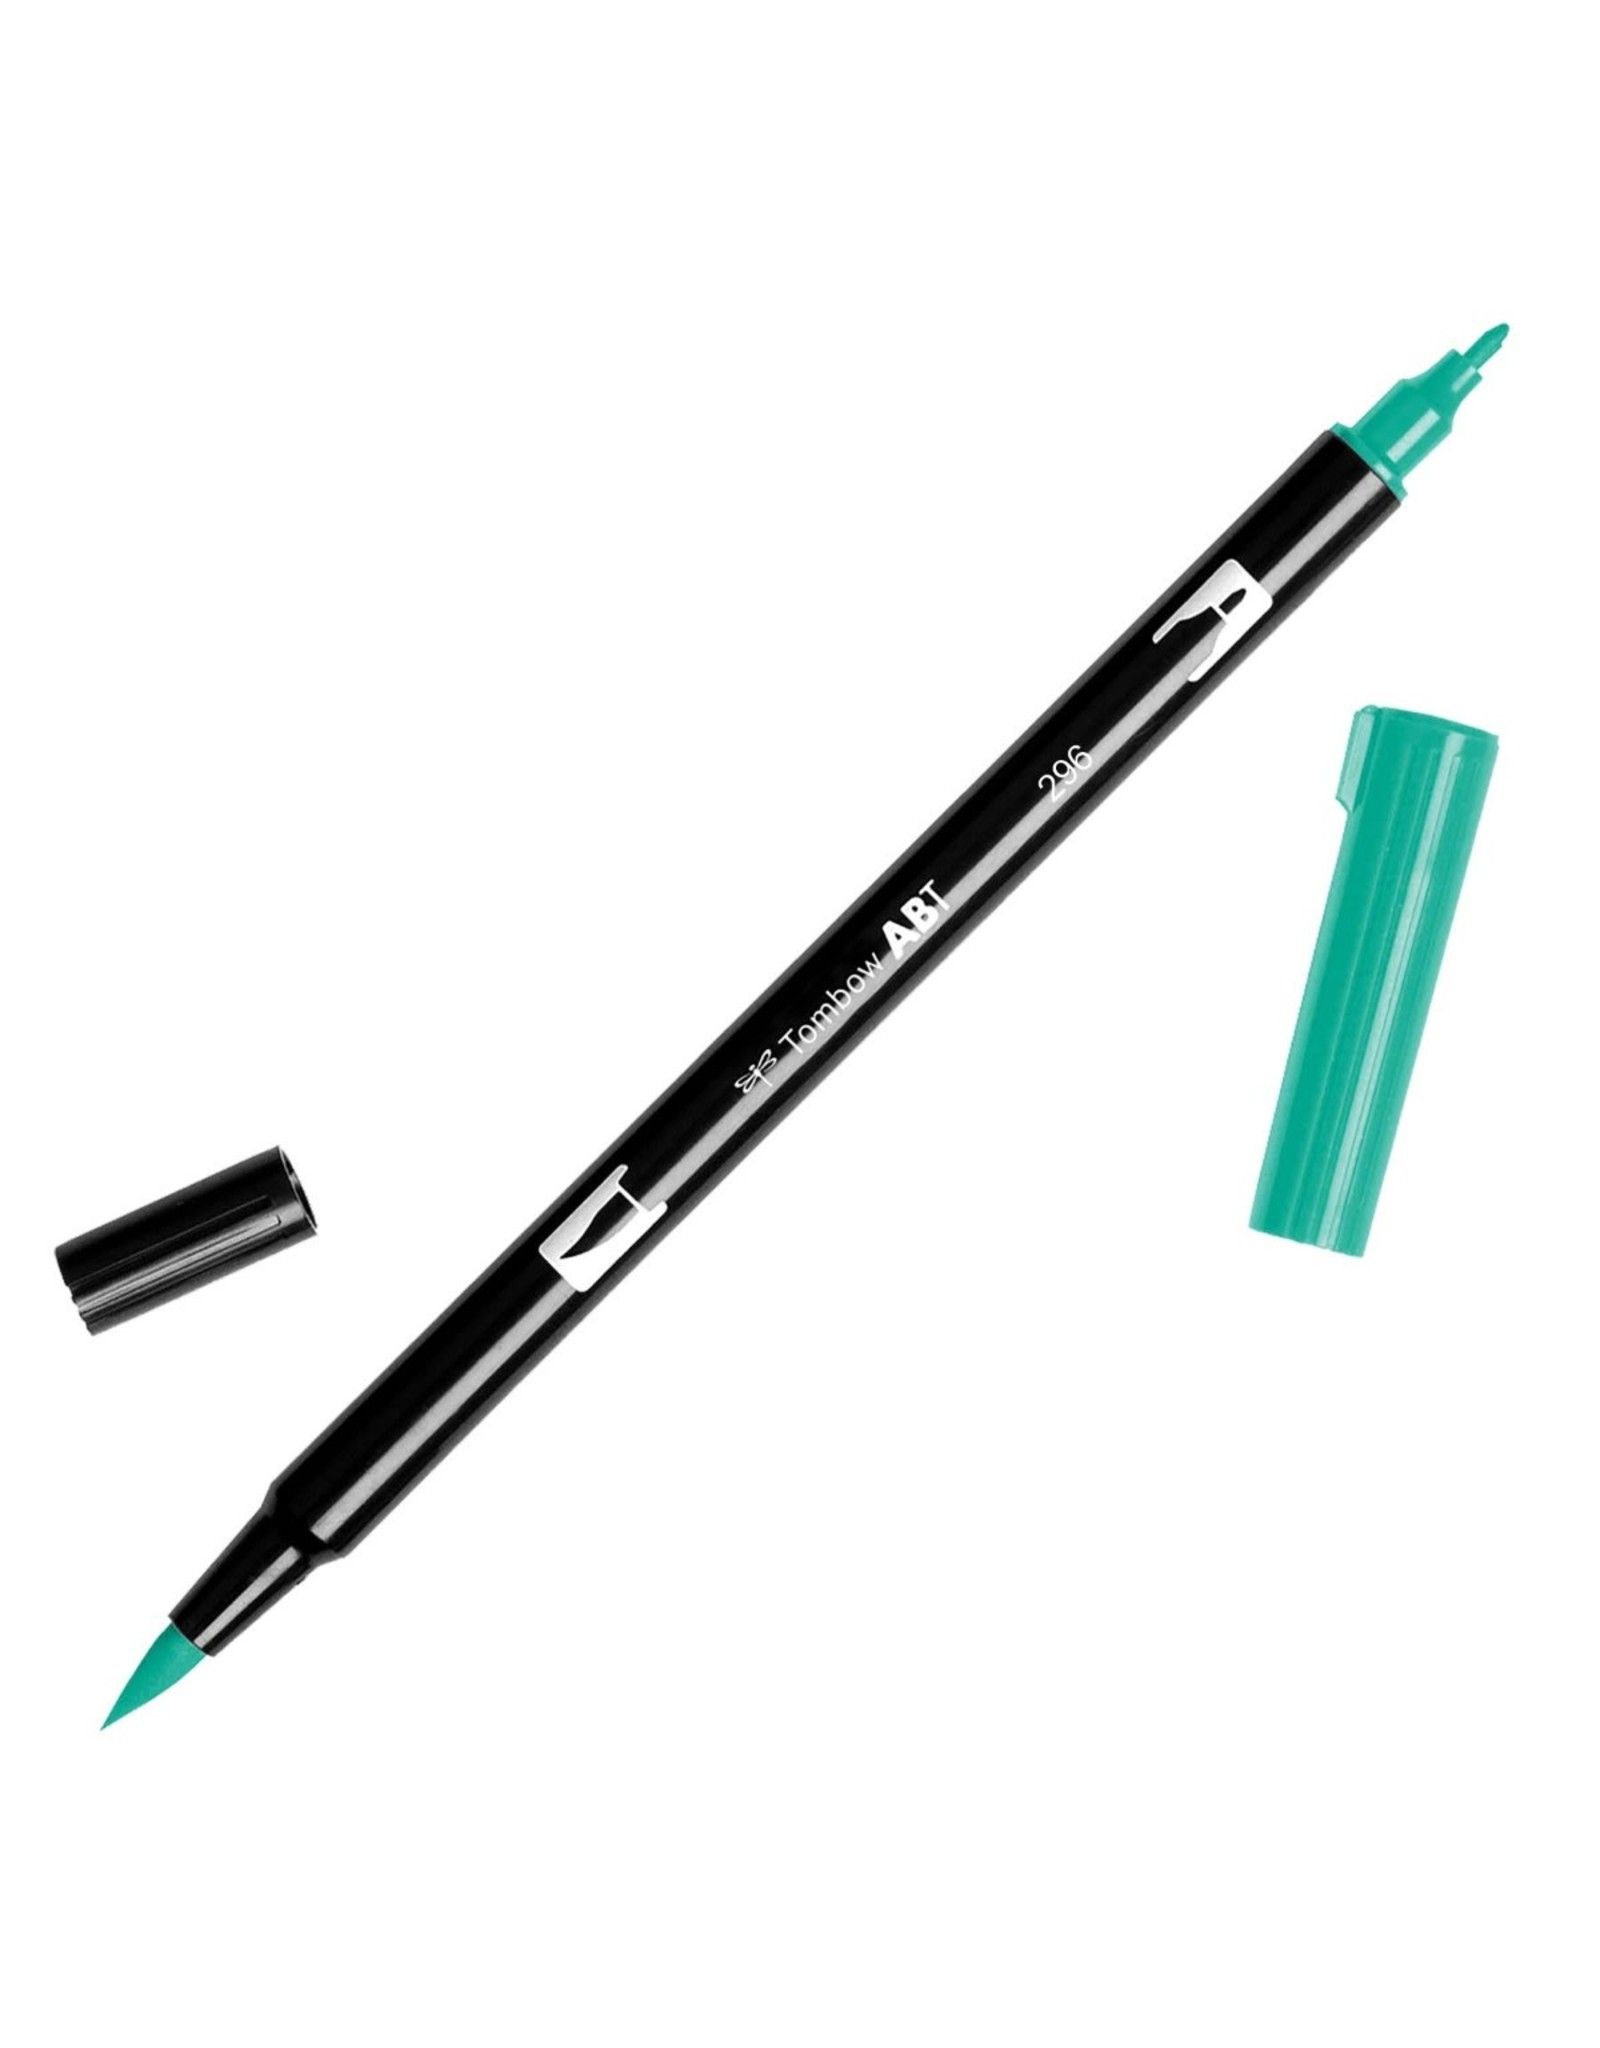 TOMBOW TOMBOW ABT-296 GREEN DUAL BRUSH MARKER